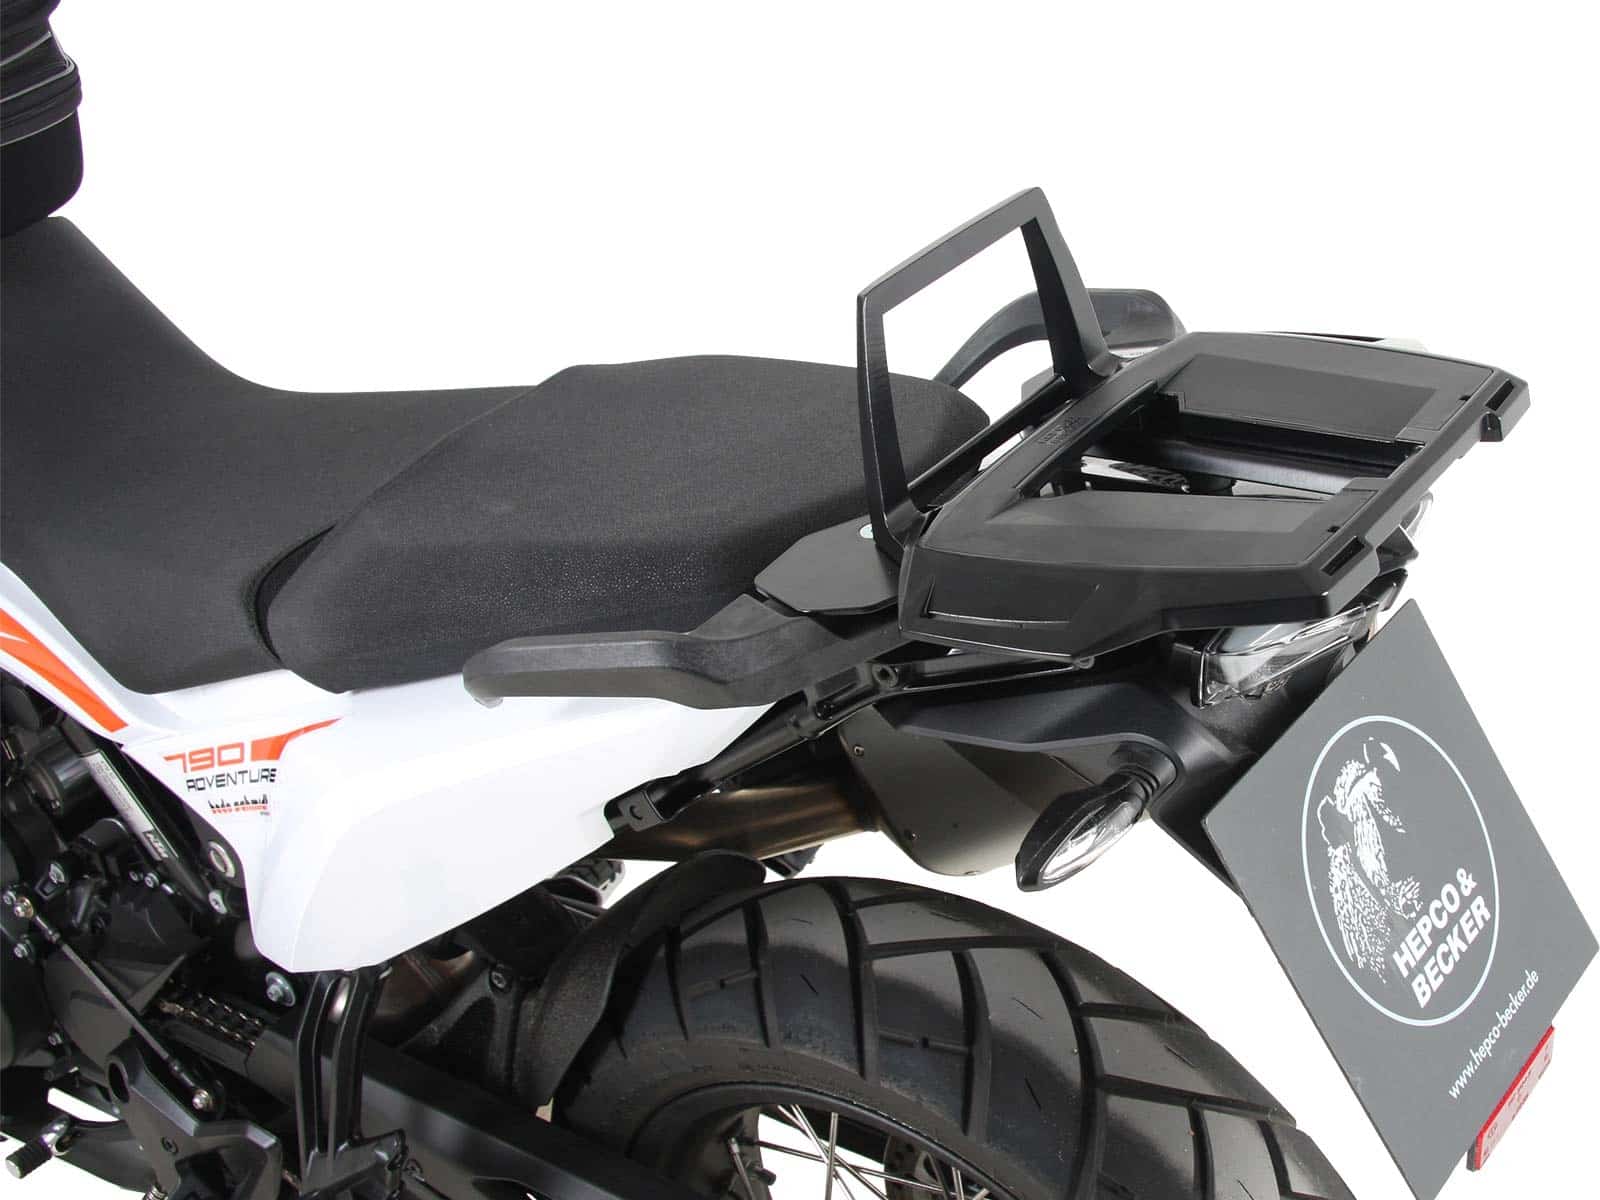 Alurack top case carrier black for combination with original rear rack for KTM 890 Adventure / R / Rally (2021-2022)